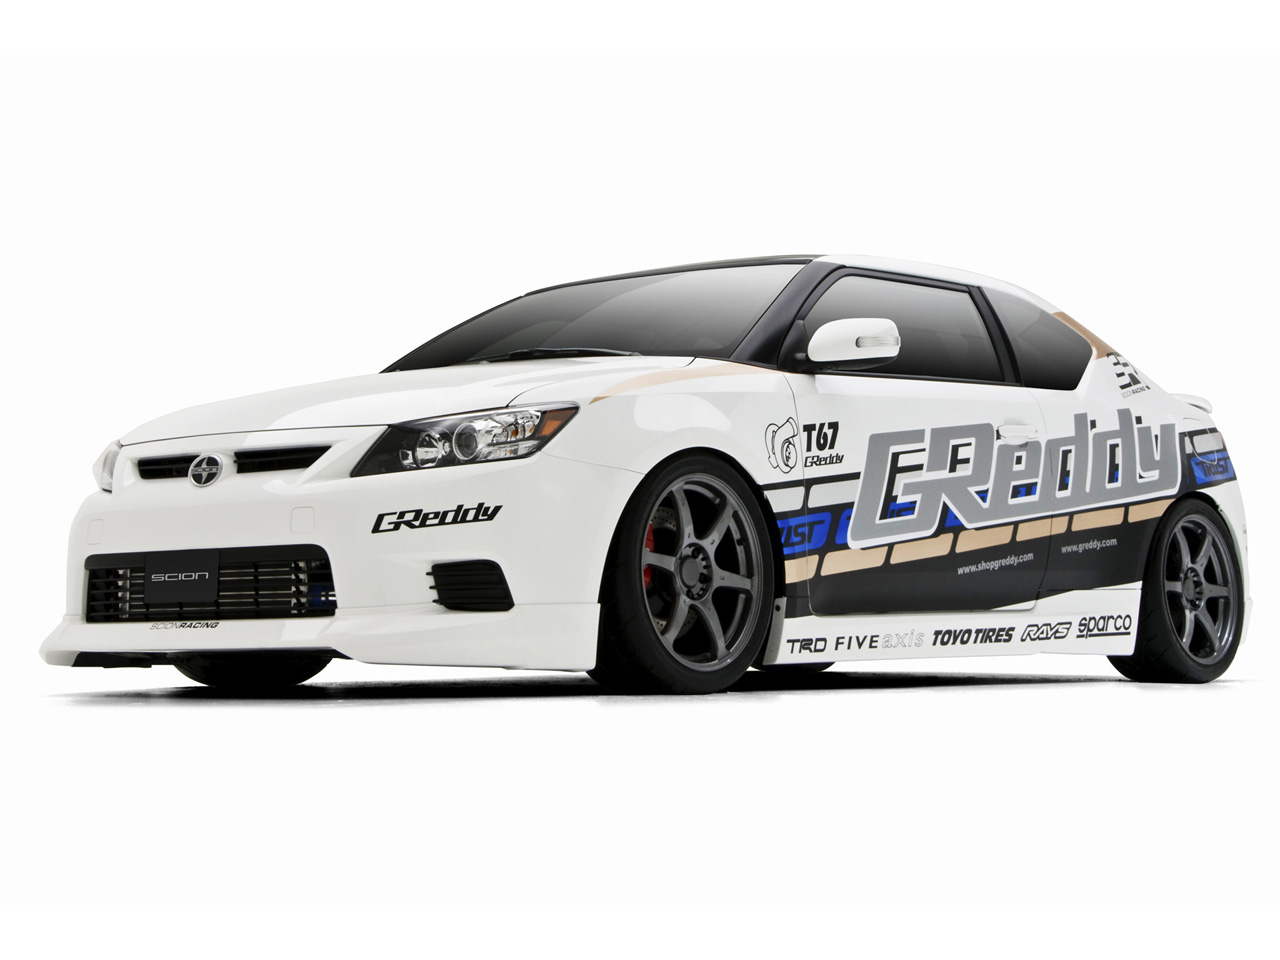 Scion Tc By Greddy Front And Side Wallpaper